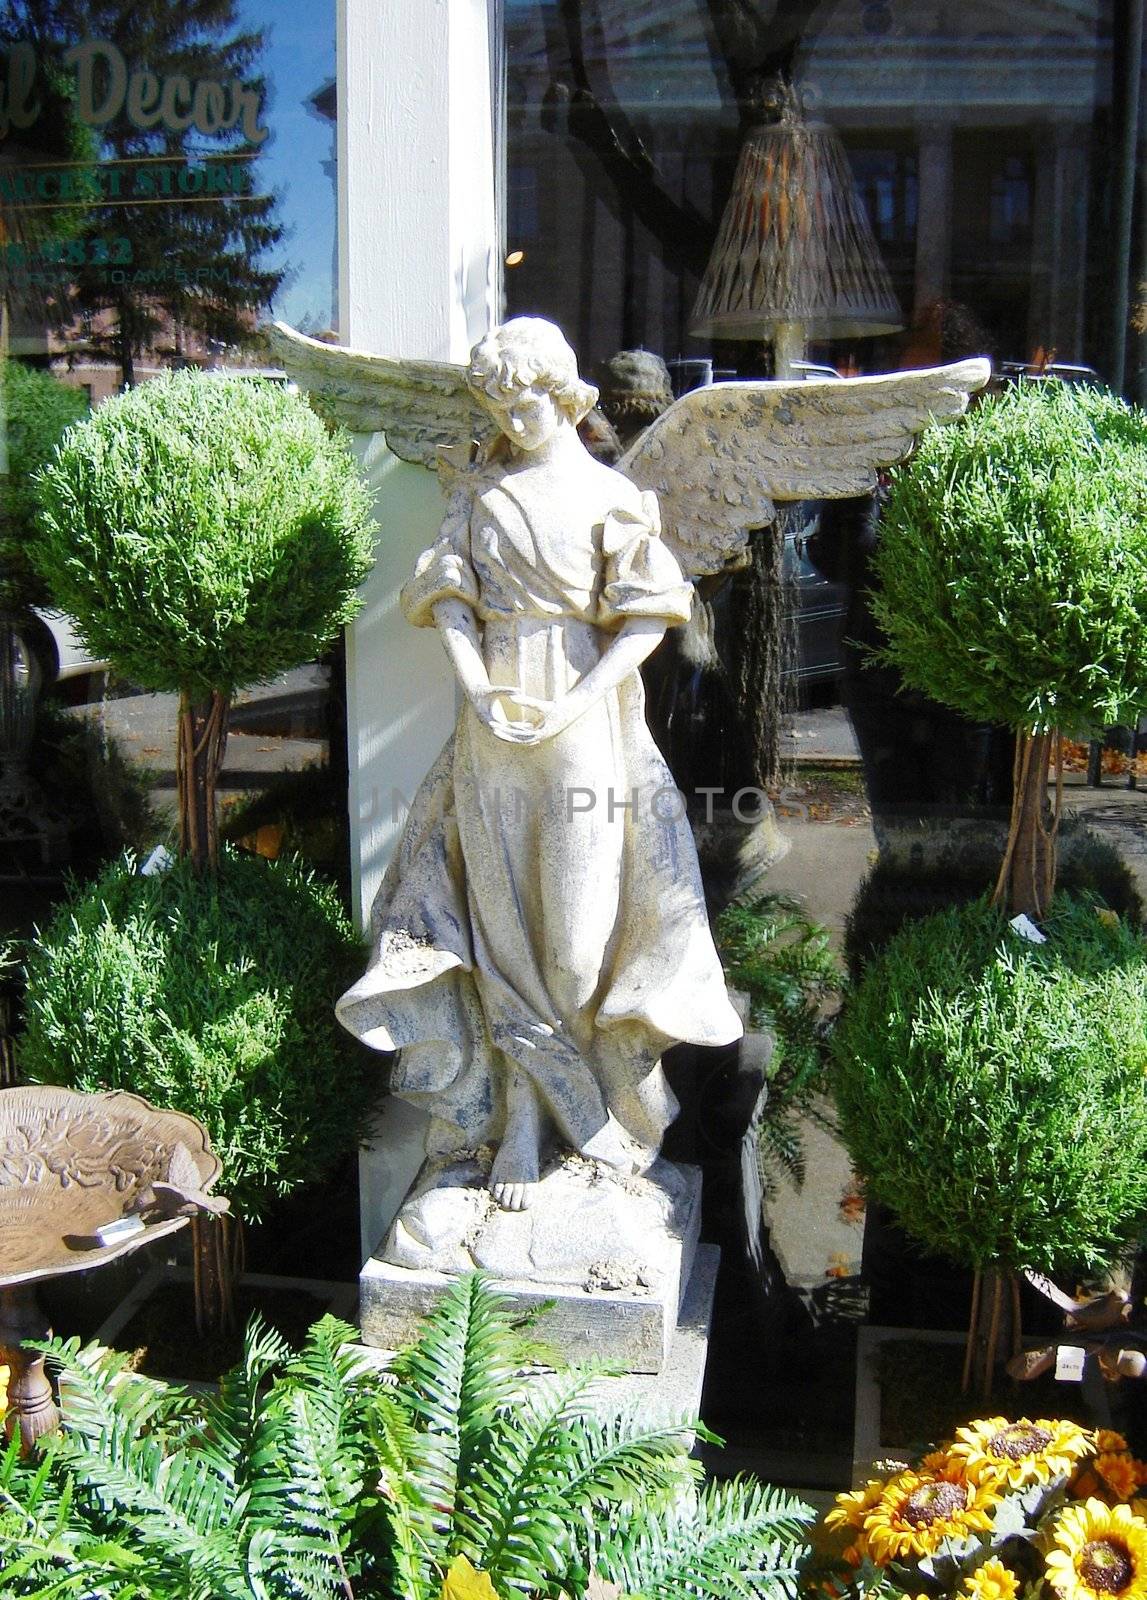 Angel with wings amongst shrubbery